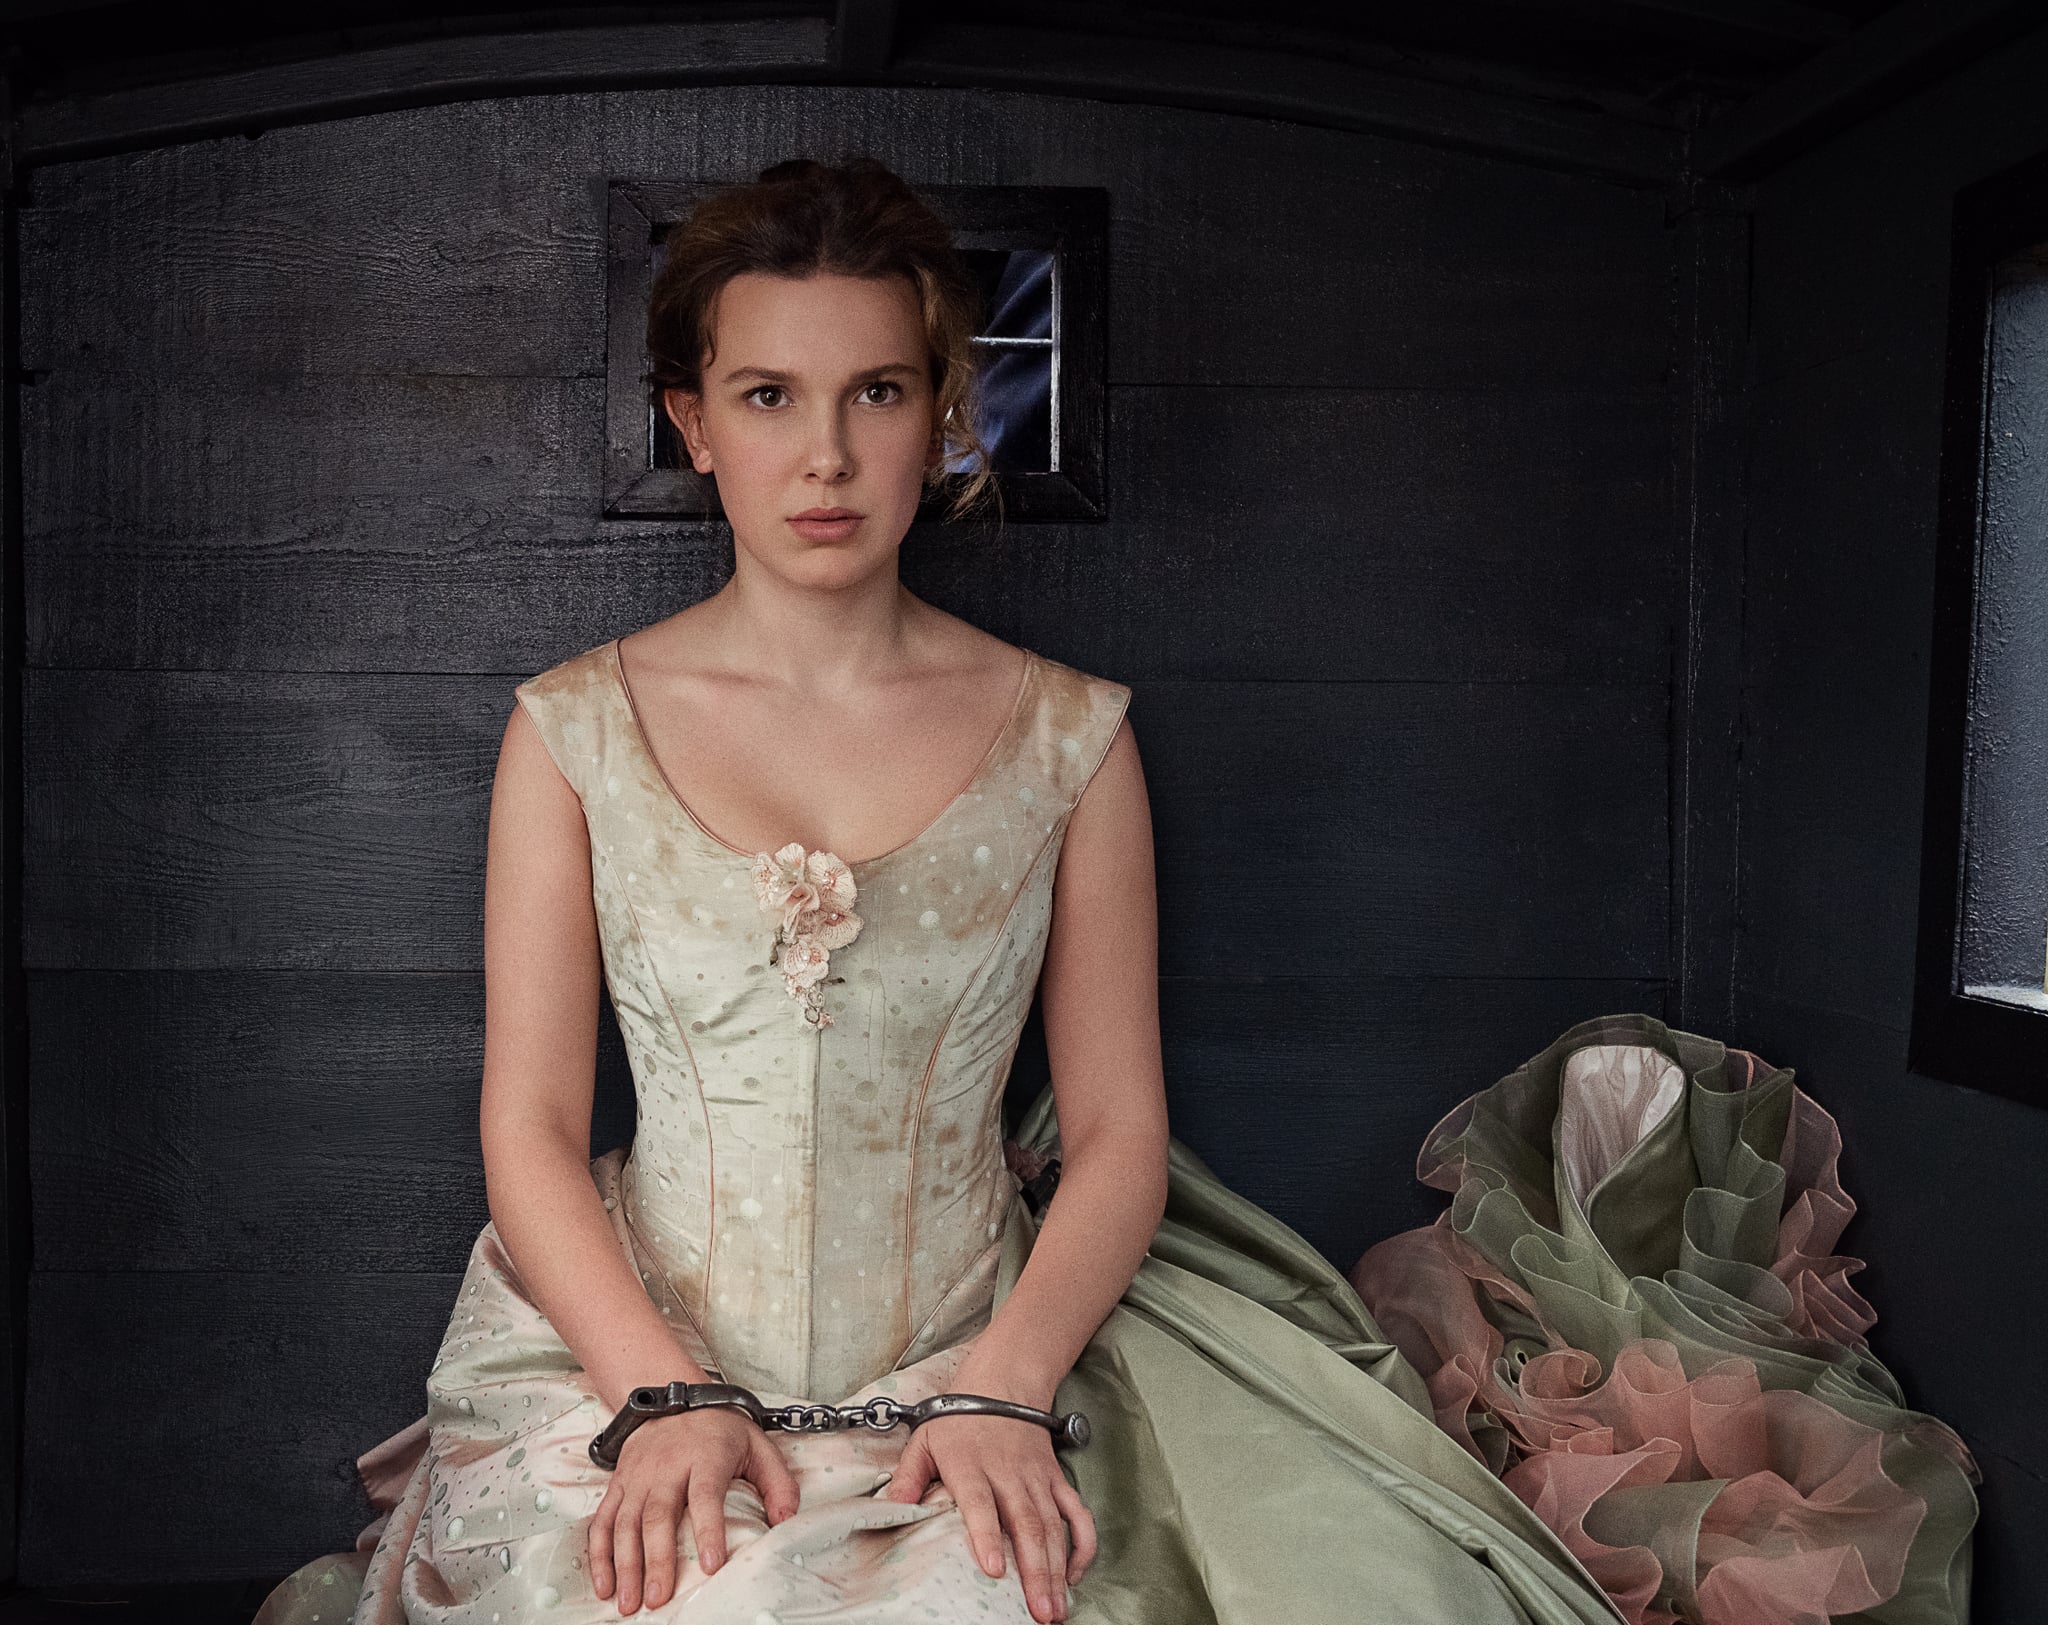 The Game Is Afoot! Millie Bobby Brown Is Back in Action in “Enola Holmes 2” Trailer